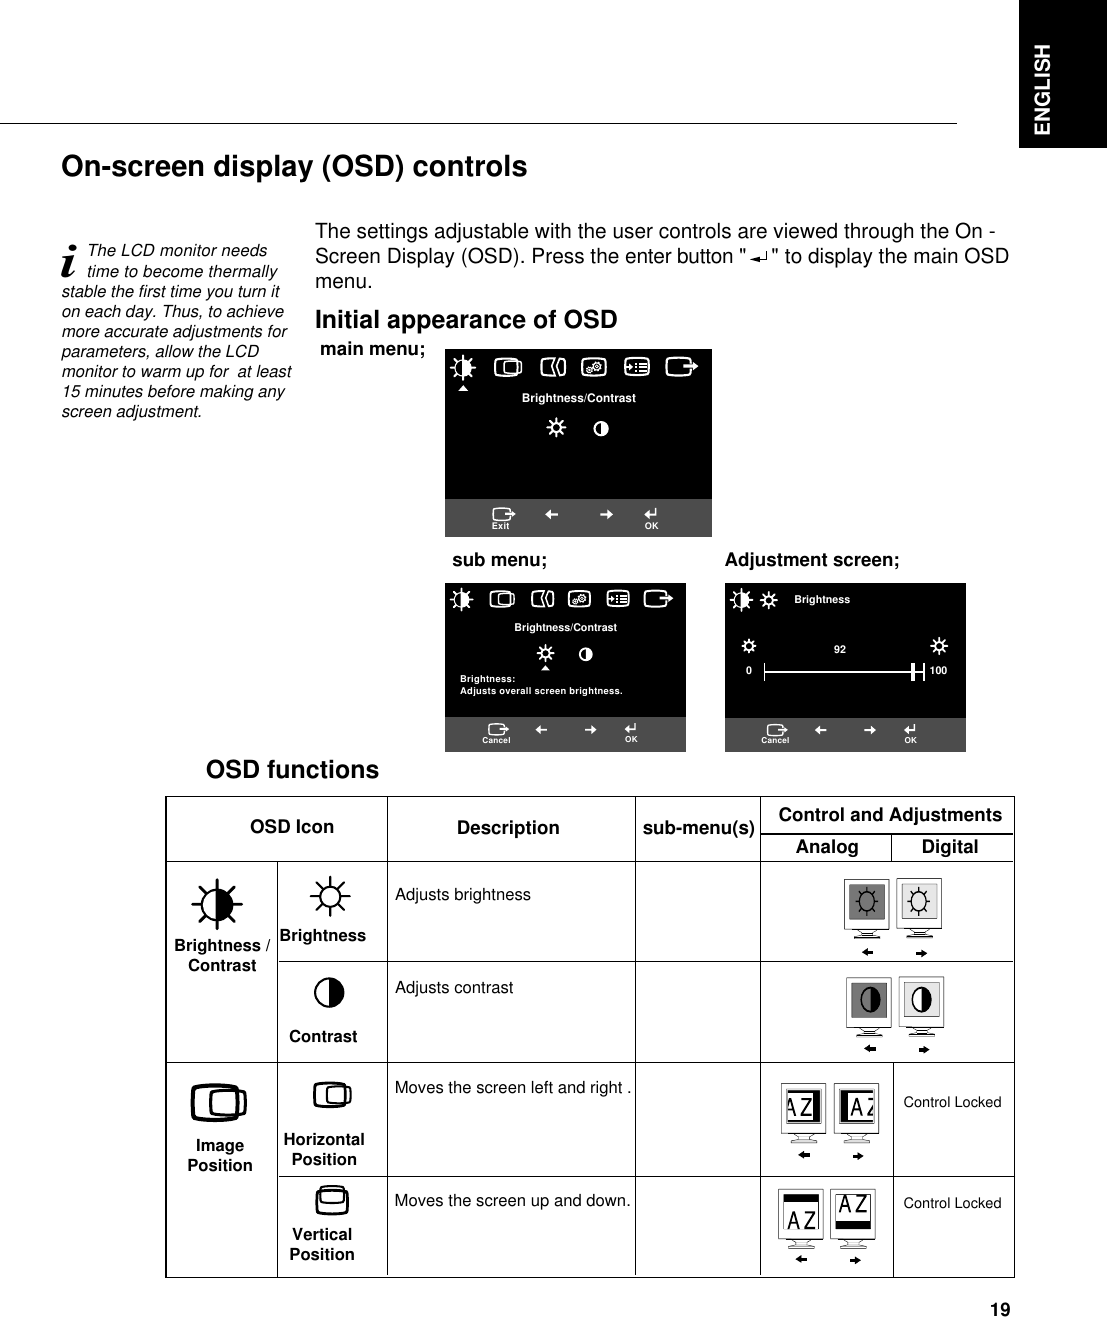 ENGLISH19The settings adjustable with the user controls are viewed through the On -Screen Display (OSD). Press the enter button &quot; &quot; to display the main OSDmenu.Initial appearance of OSDOn-screen display (OSD) controlsiThe LCD monitor needstime to become thermallystable the first time you turn iton each day. Thus, to achievemore accurate adjustments forparameters, allow the LCDmonitor to warm up for  at least15 minutes before making anyscreen adjustment.Brightness/ContrastExit OKBrightness/ContrastBrightness:Adjusts overall screen brightness.Cancel OKBrightness092100Cancel OKOSD functionsOSD Icon Description sub-menu(s) Control and AdjustmentsAdjusts brightnessAdjusts contrastBrightnessContrastsub menu;  Adjustment screen; main menu; HorizontalPositionVerticalPositionMoves the screen left and right .Moves the screen up and down.Brightness /ContrastImagePositionAnalog            DigitalControl LockedControl Locked